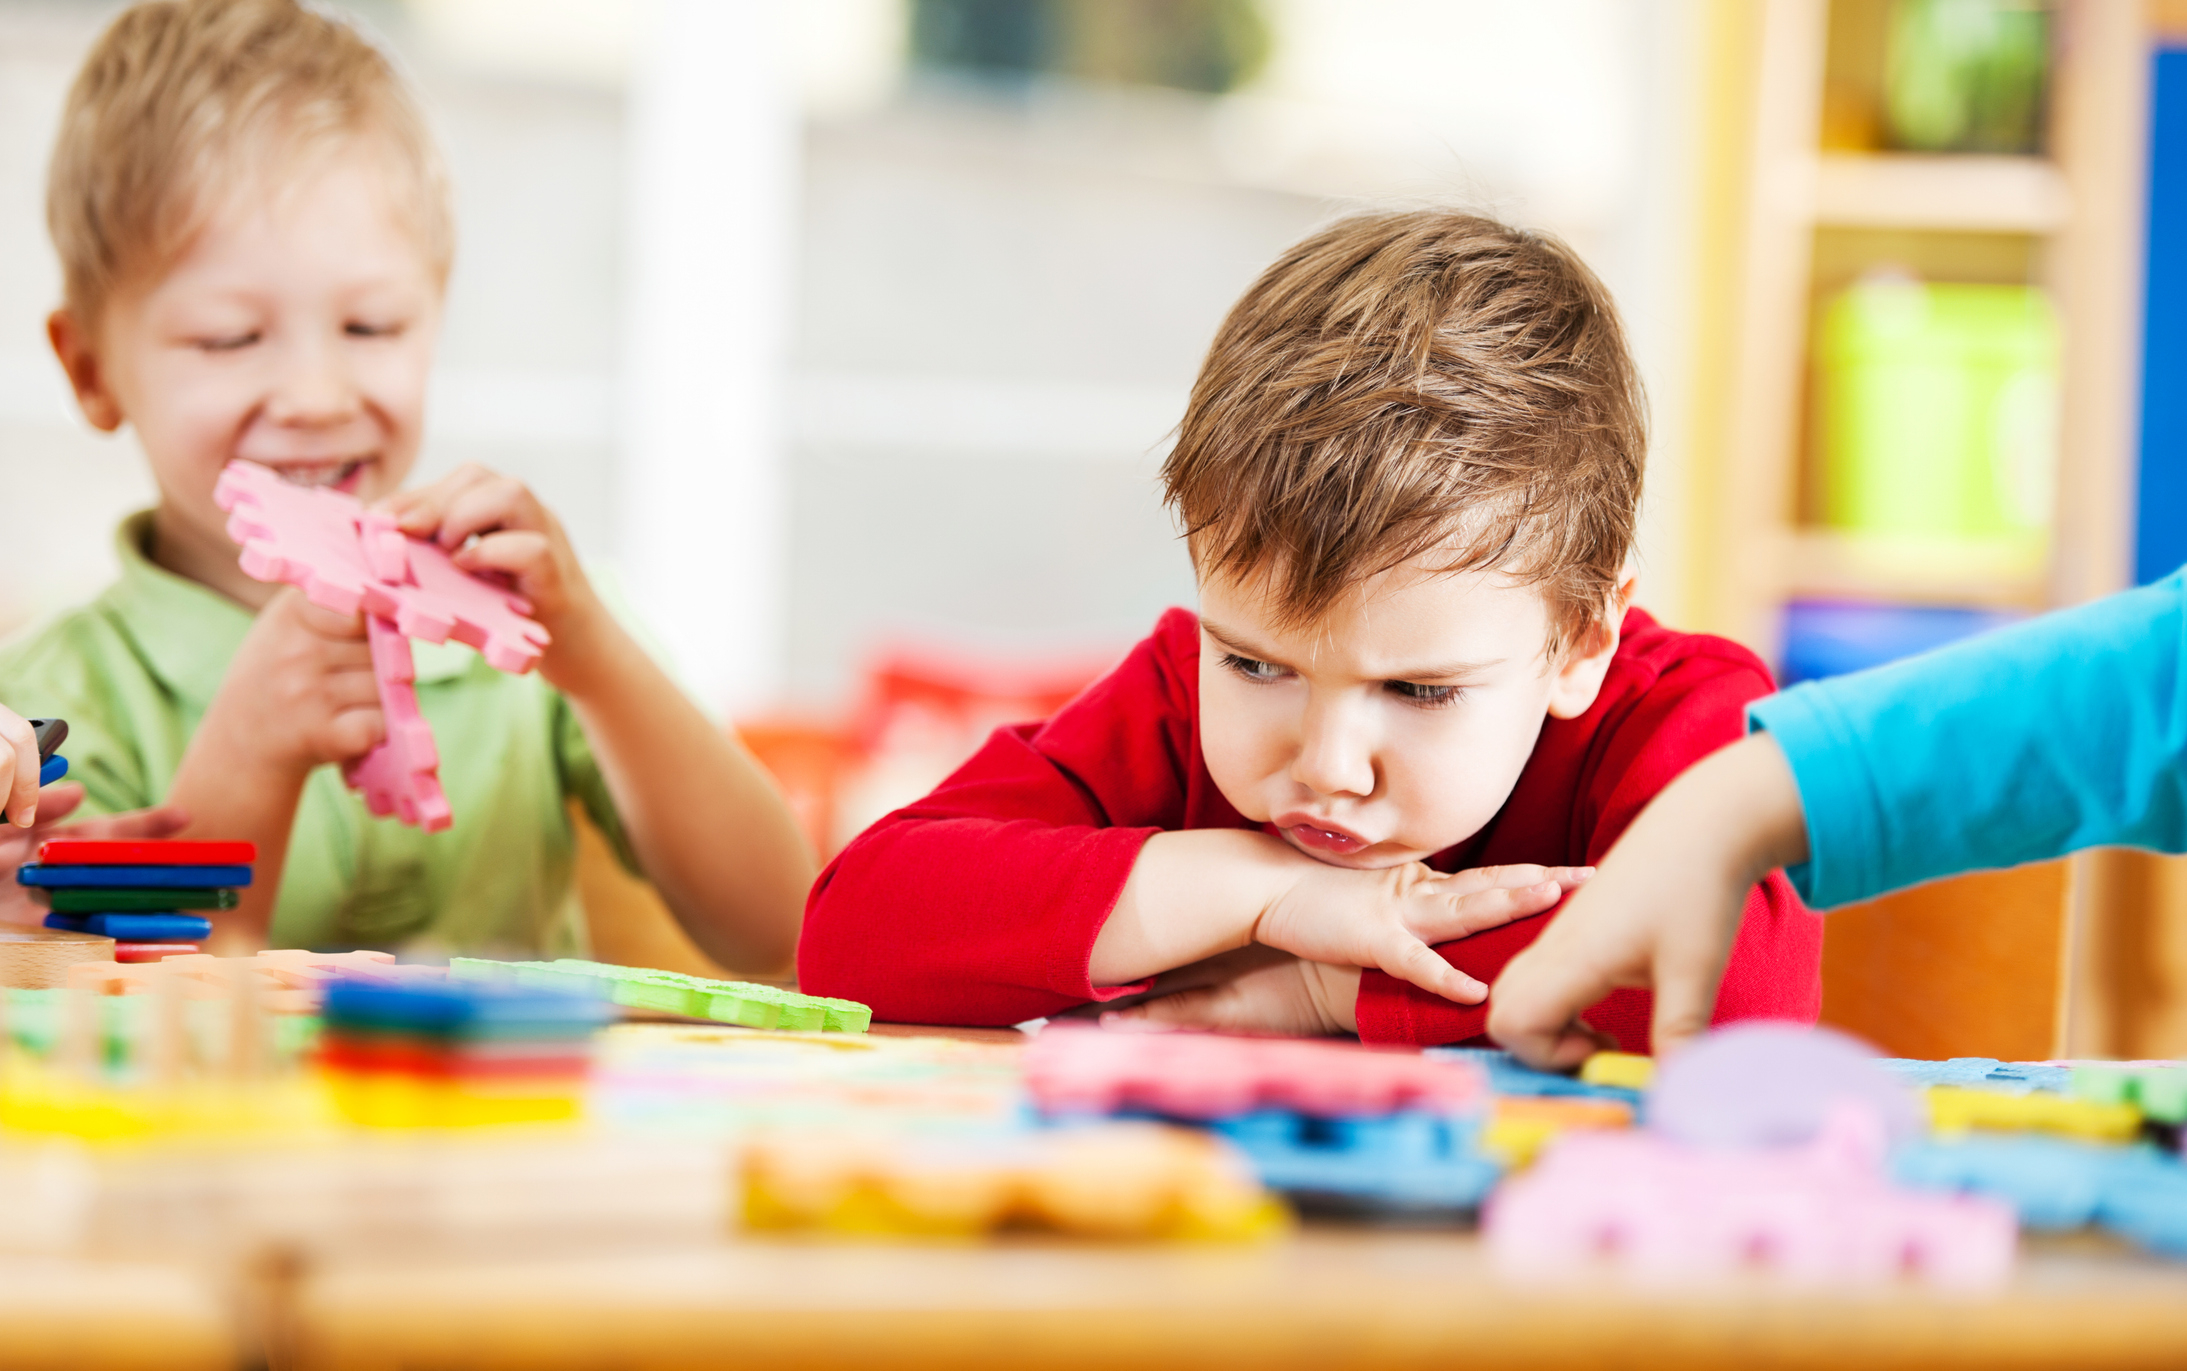 Three children engaged in play with colorful puzzle pieces at a table